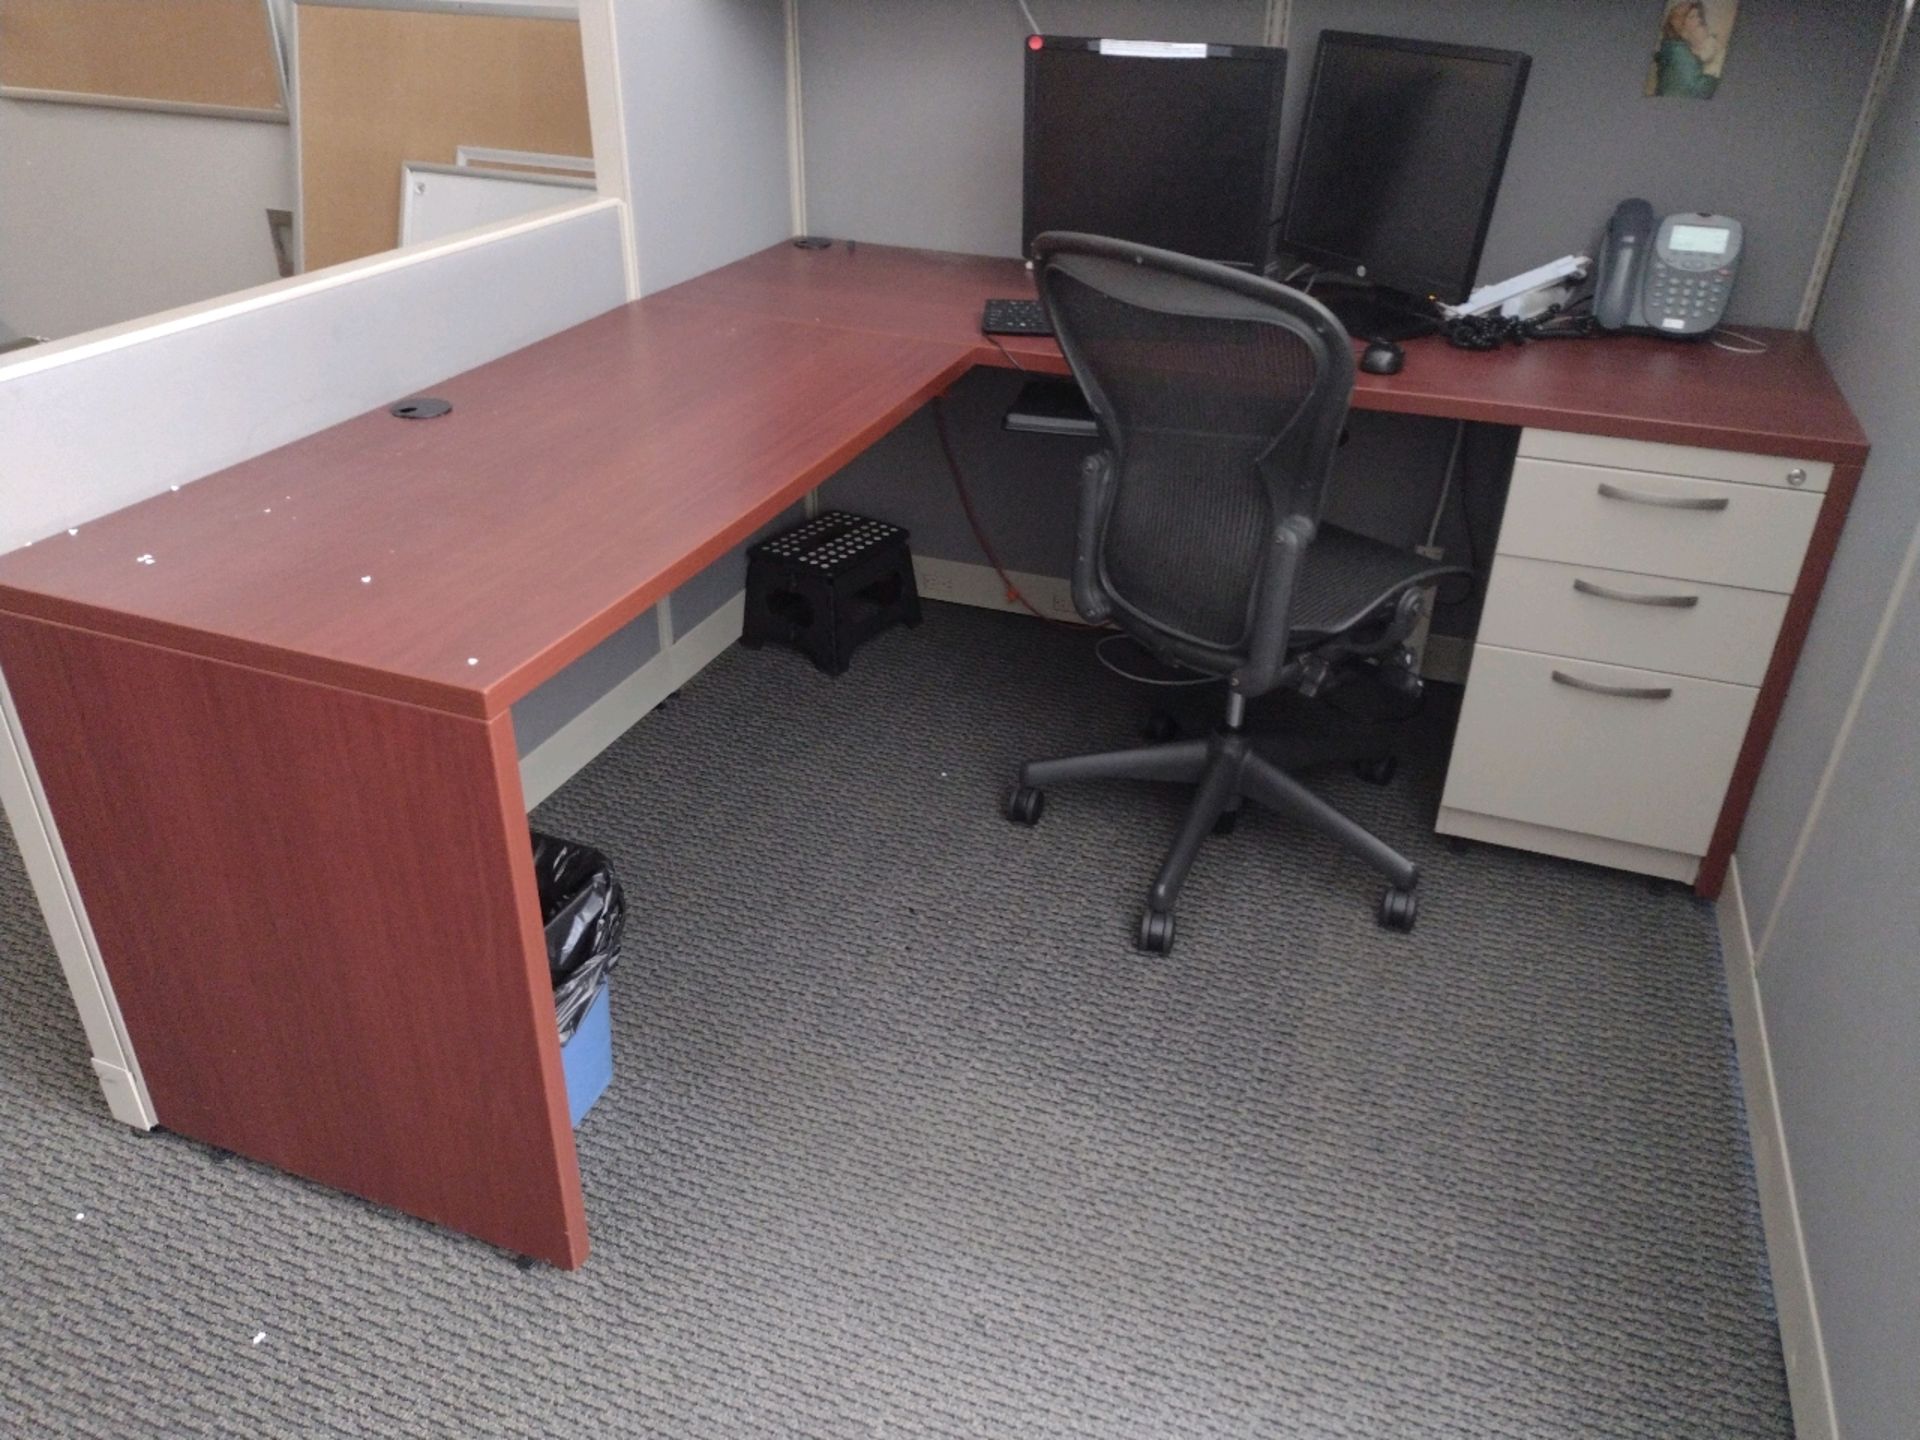 OFFICE TO INCLUDE: QTY. (2) DESKS WITH OVERHEAD STORAGE, CHAIRS, QTY. (4) FILE CABINETS, BULLETIN